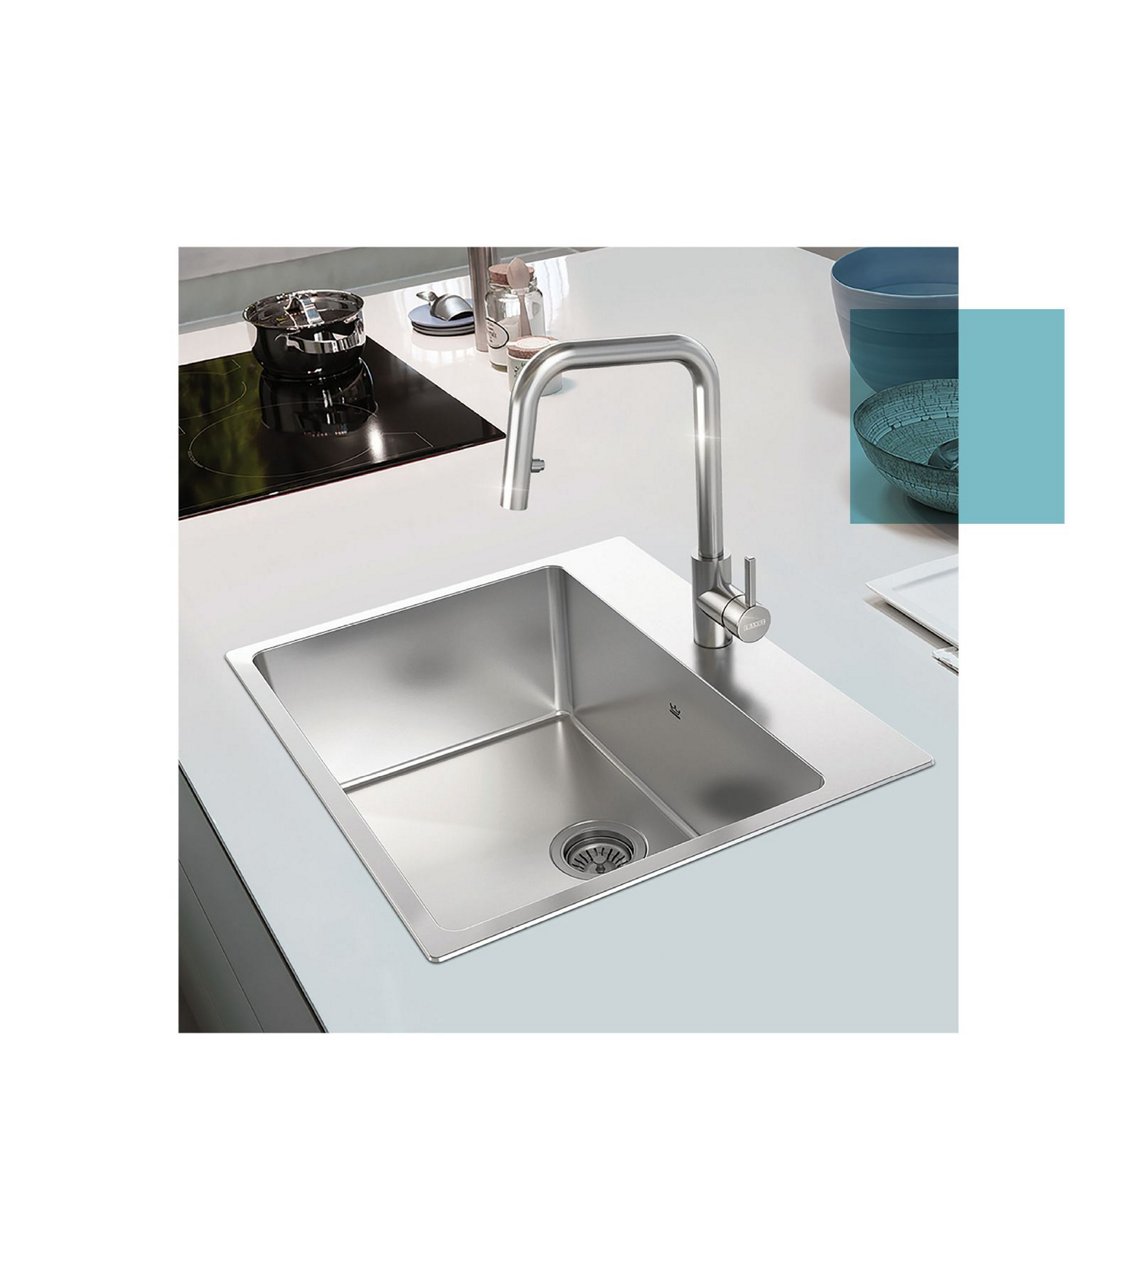 Top view of a Kindred Brookmore prep kitchen sink with a stainless steel faucet